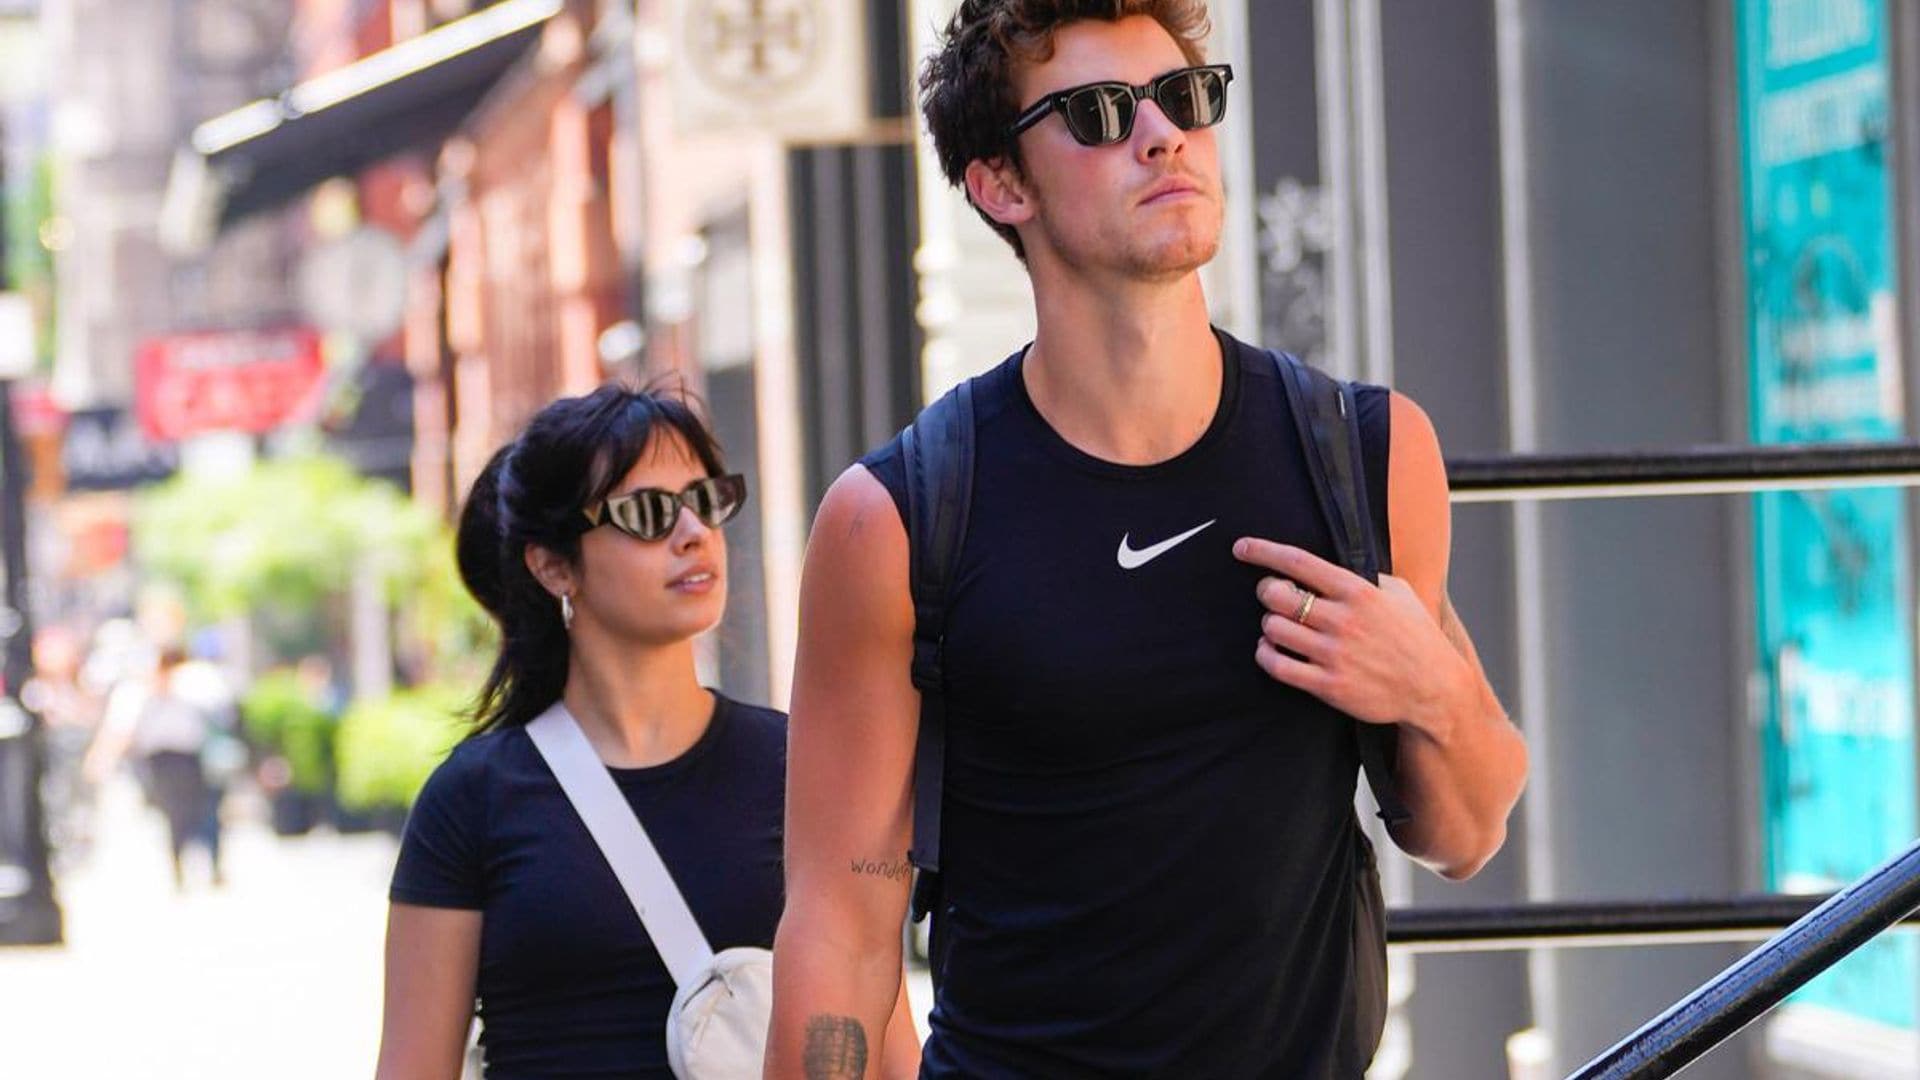 Shawn Mendes and Camila Cabello step out in matching gym outfits